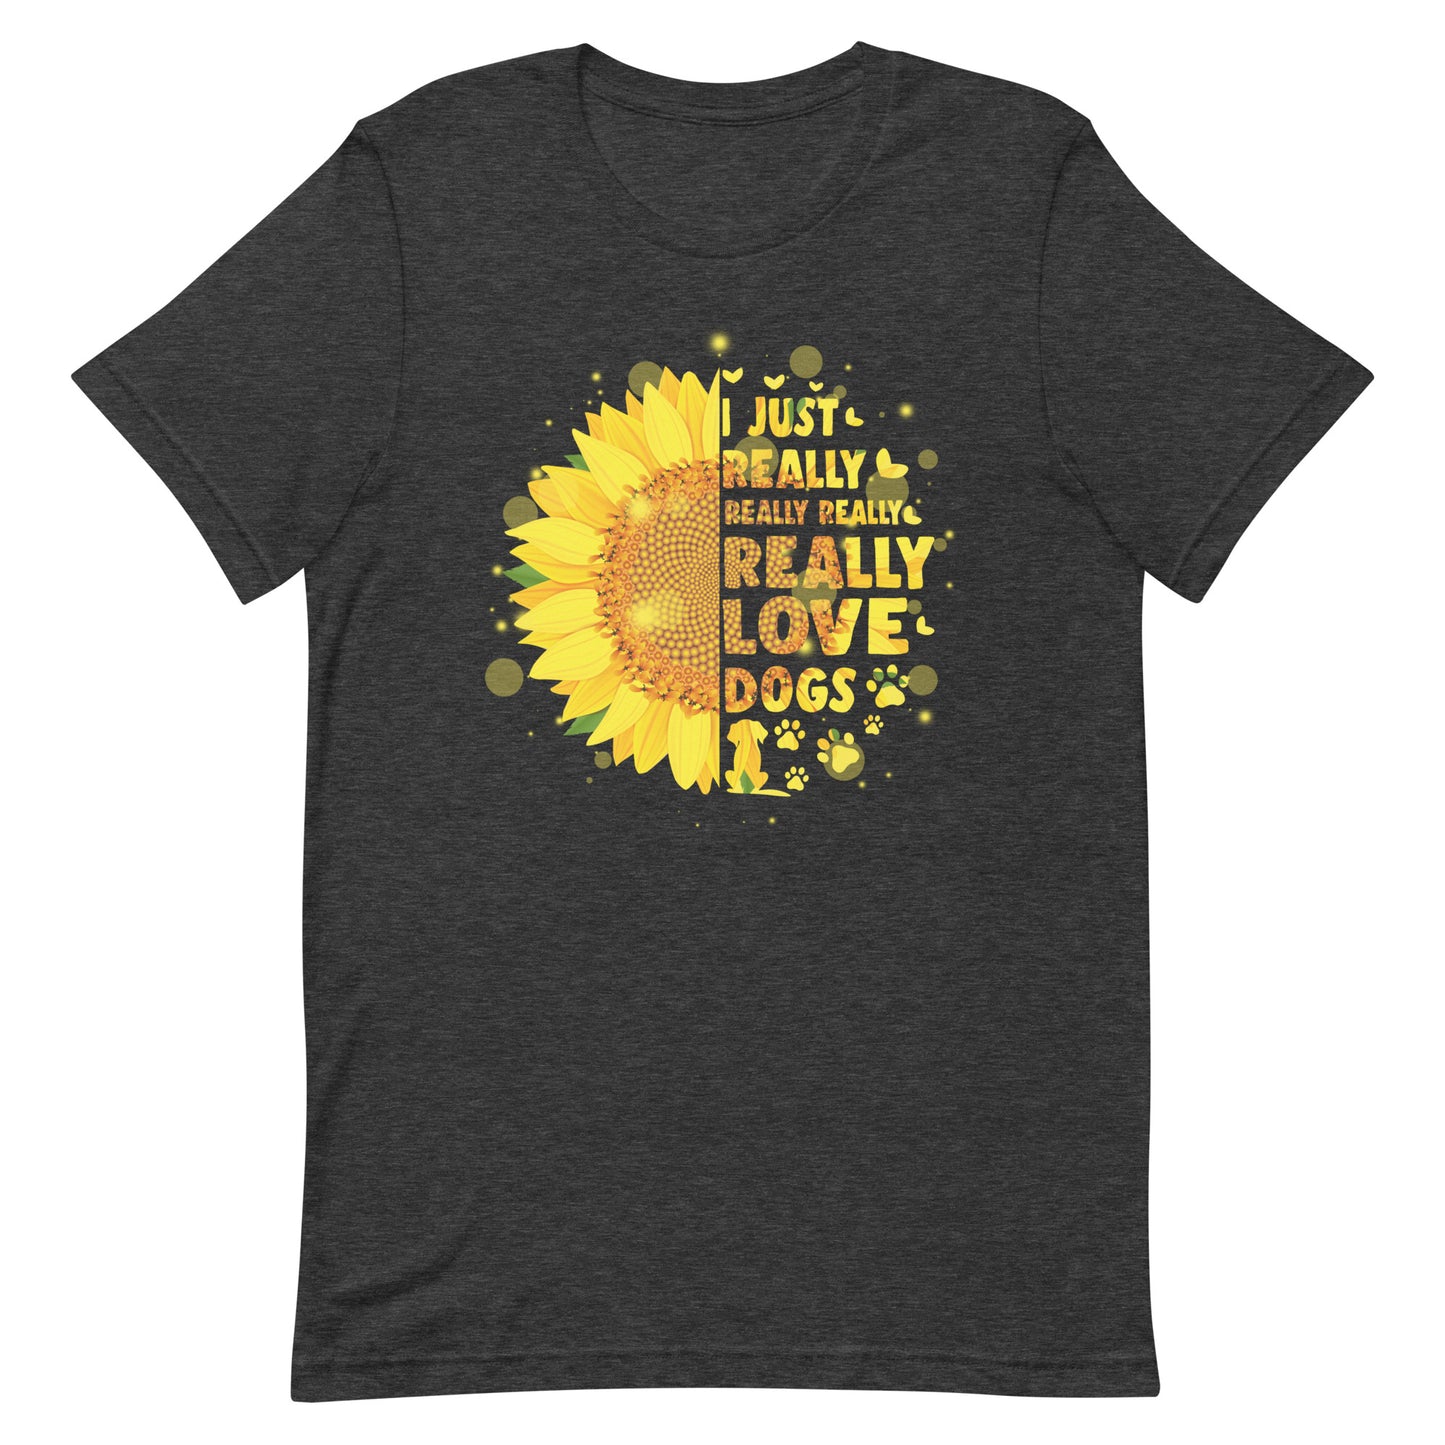 Really really really Love Dogs Sunflower T-Shirt